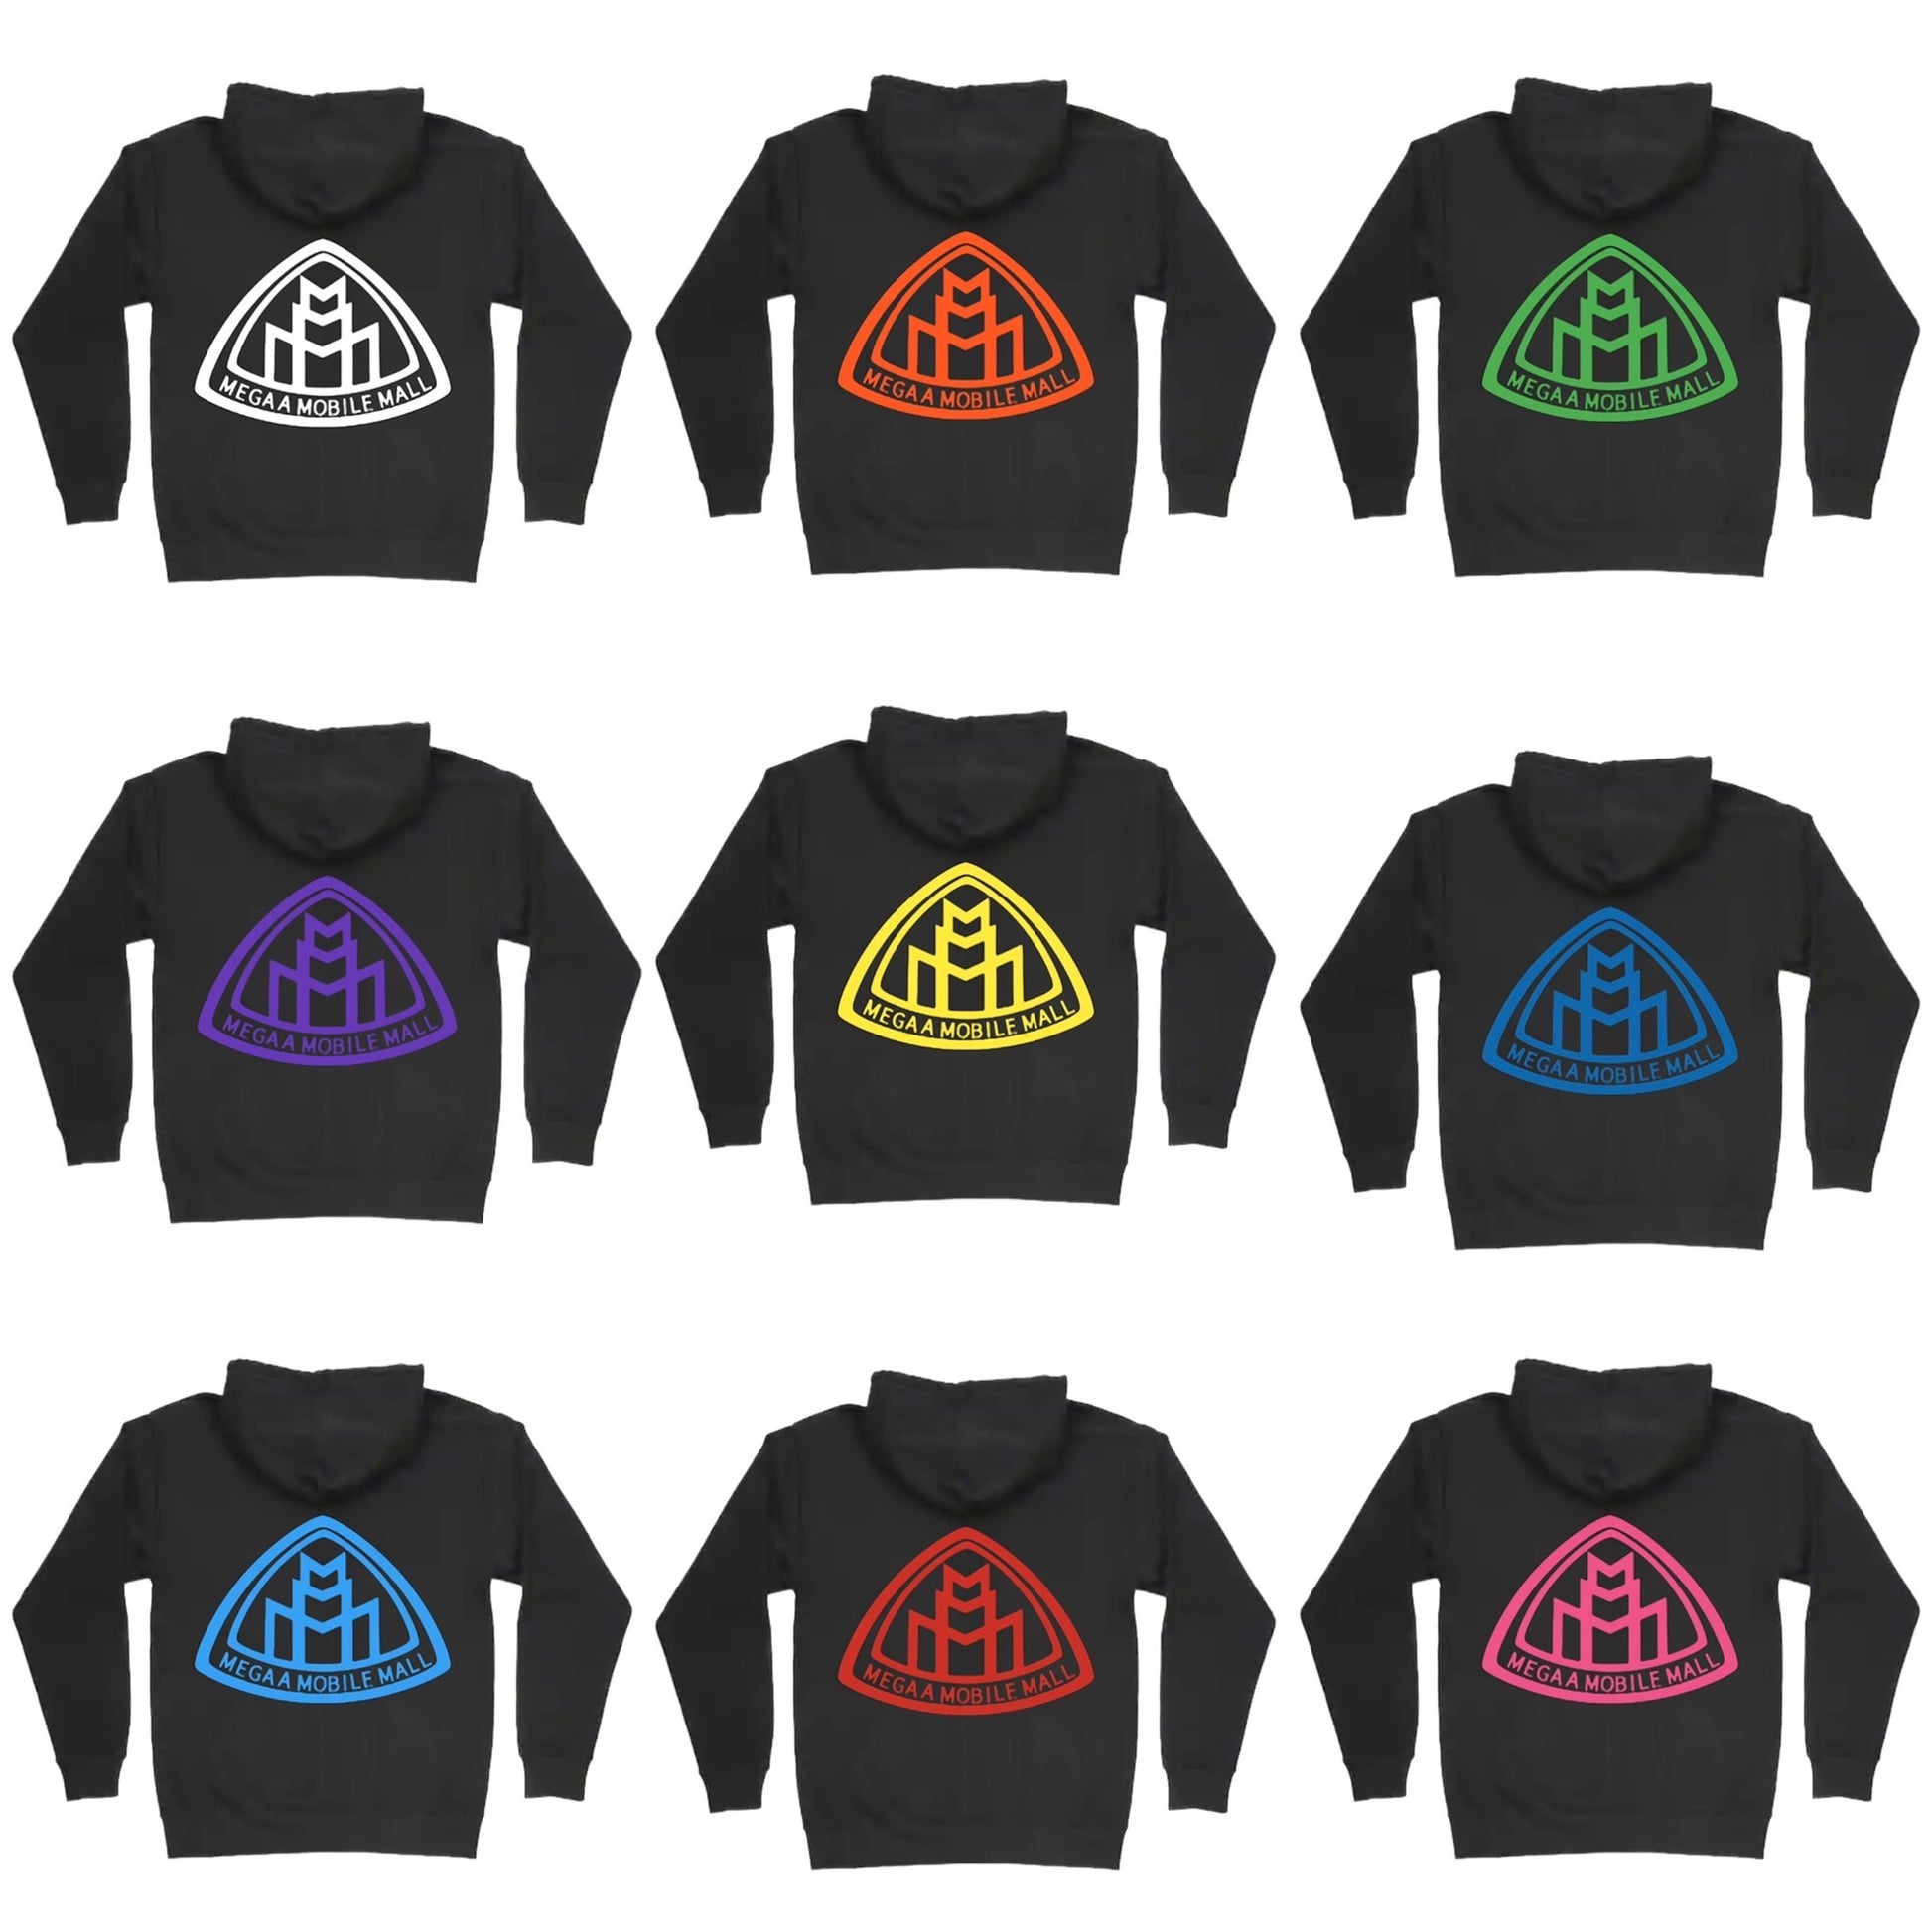 megaamobilemall black zip up hoodie in 9 different logo color options back side